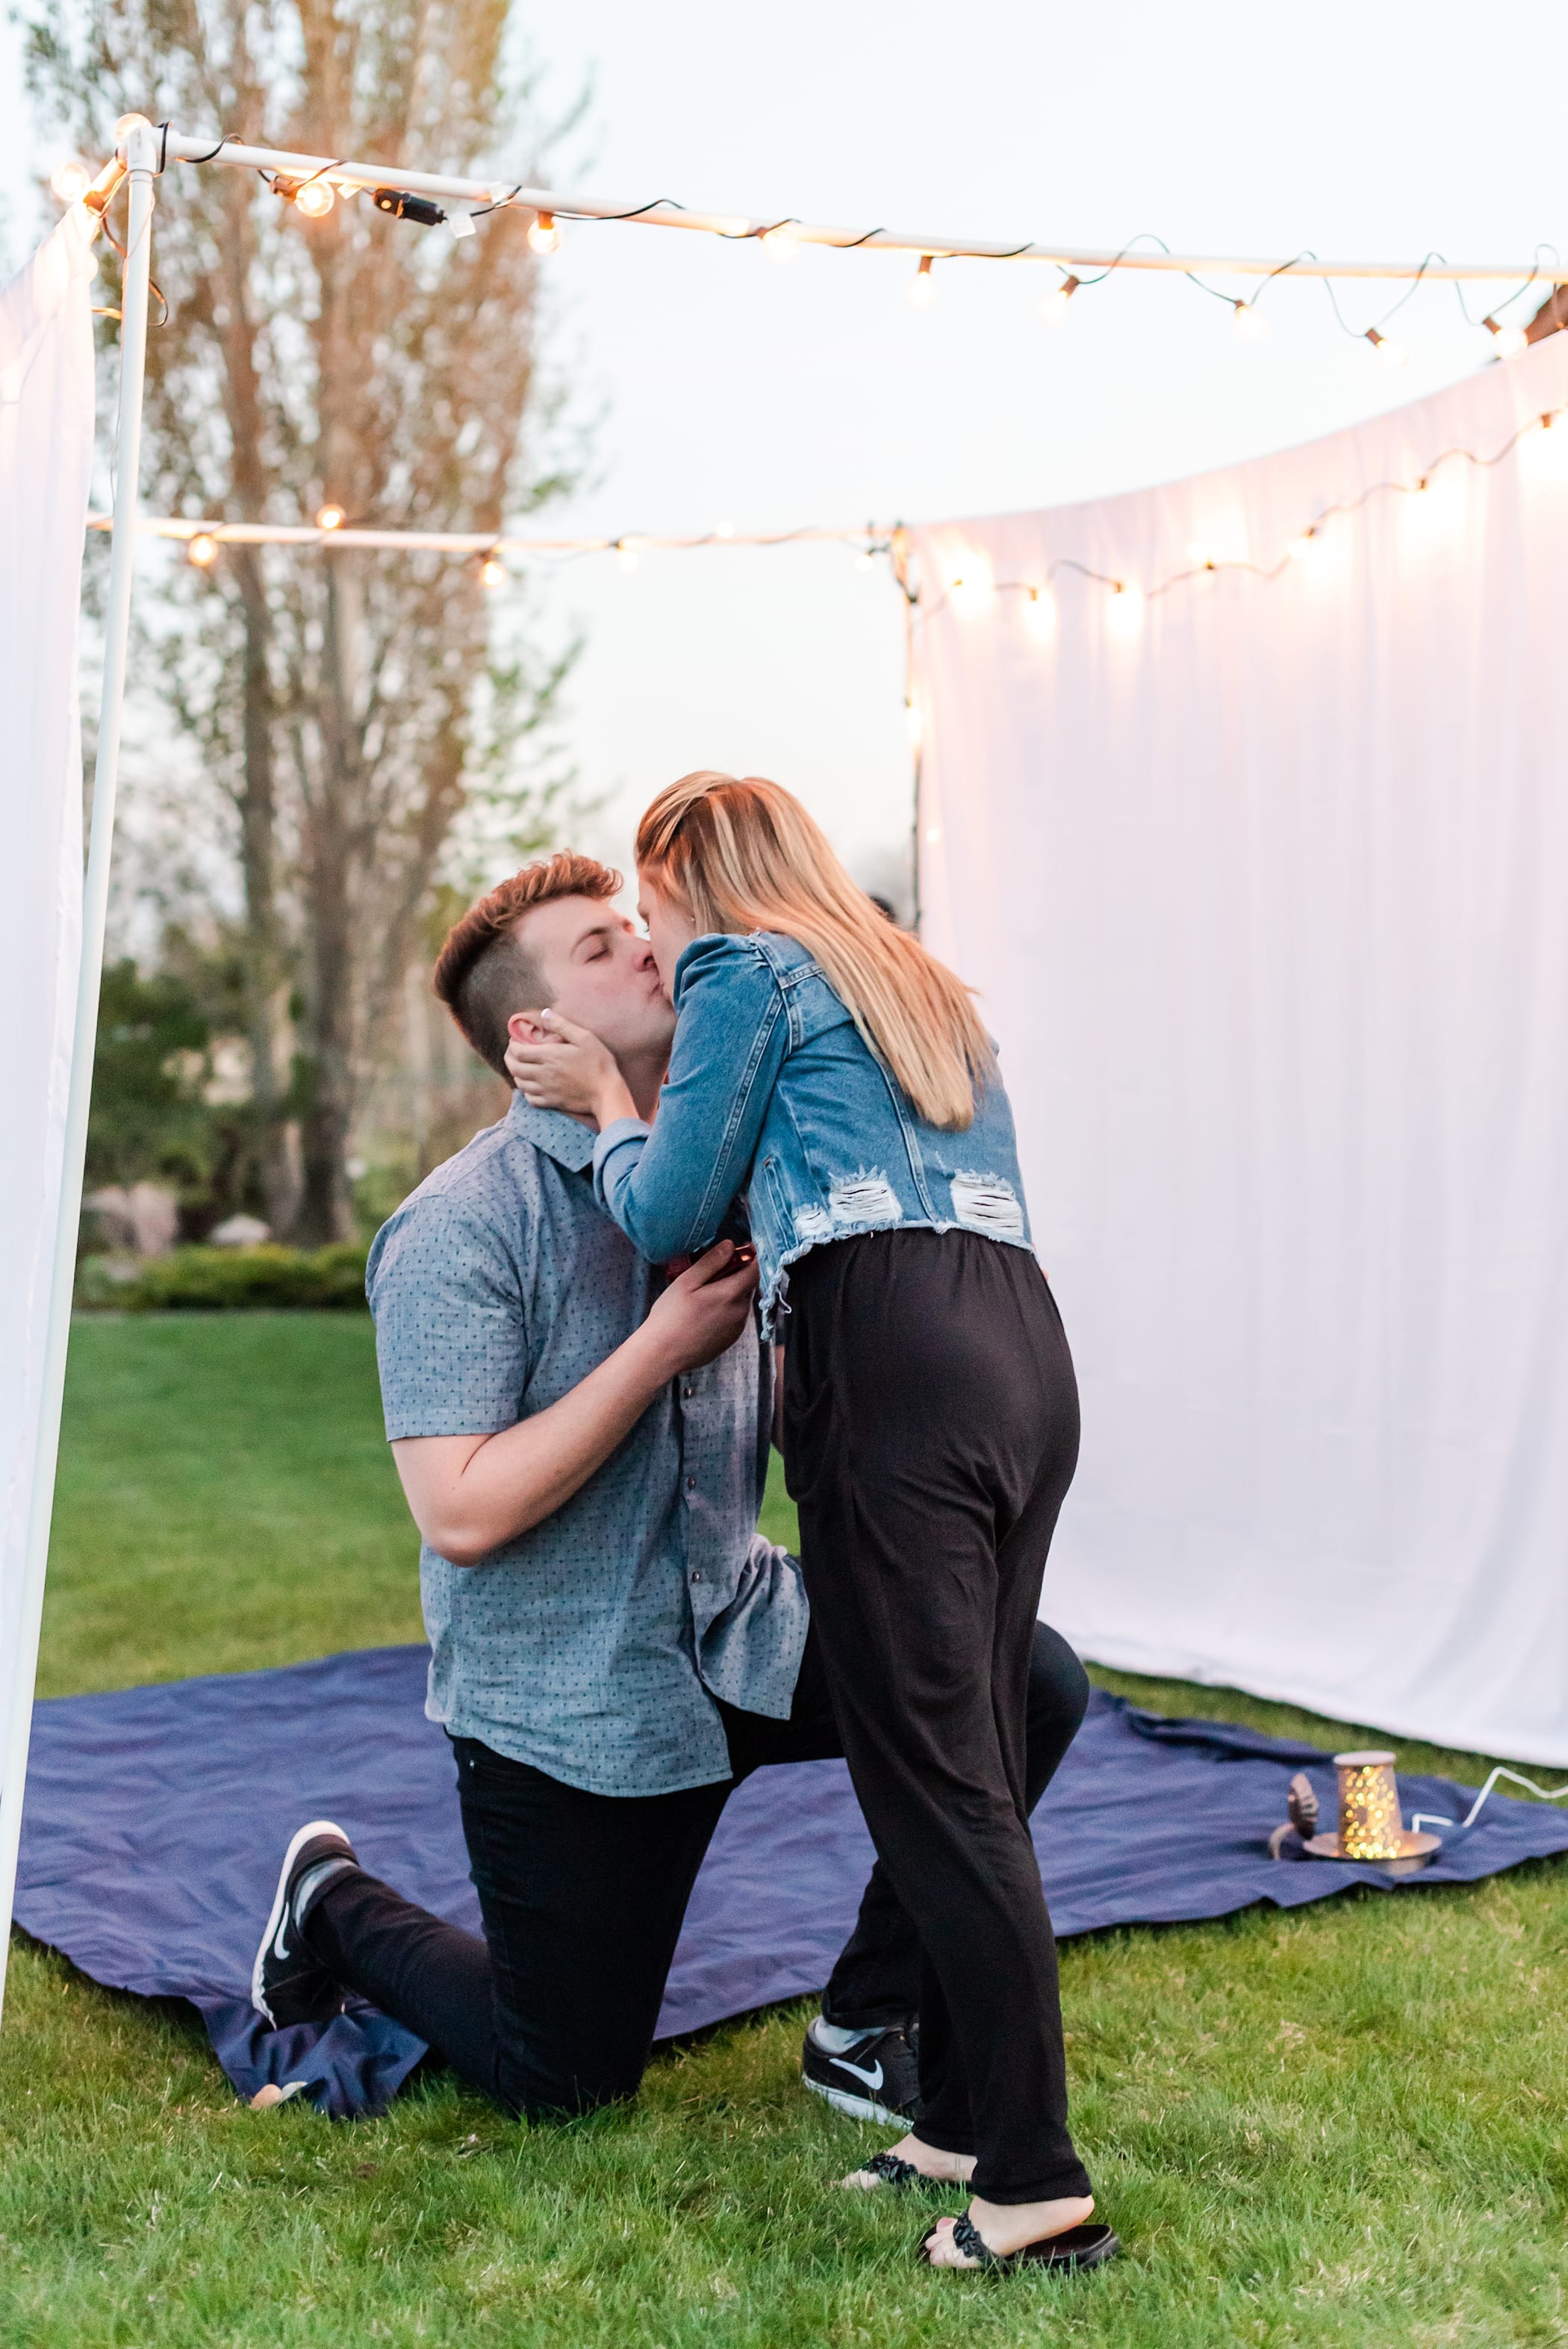 Greatest Showman inspired proposal photos